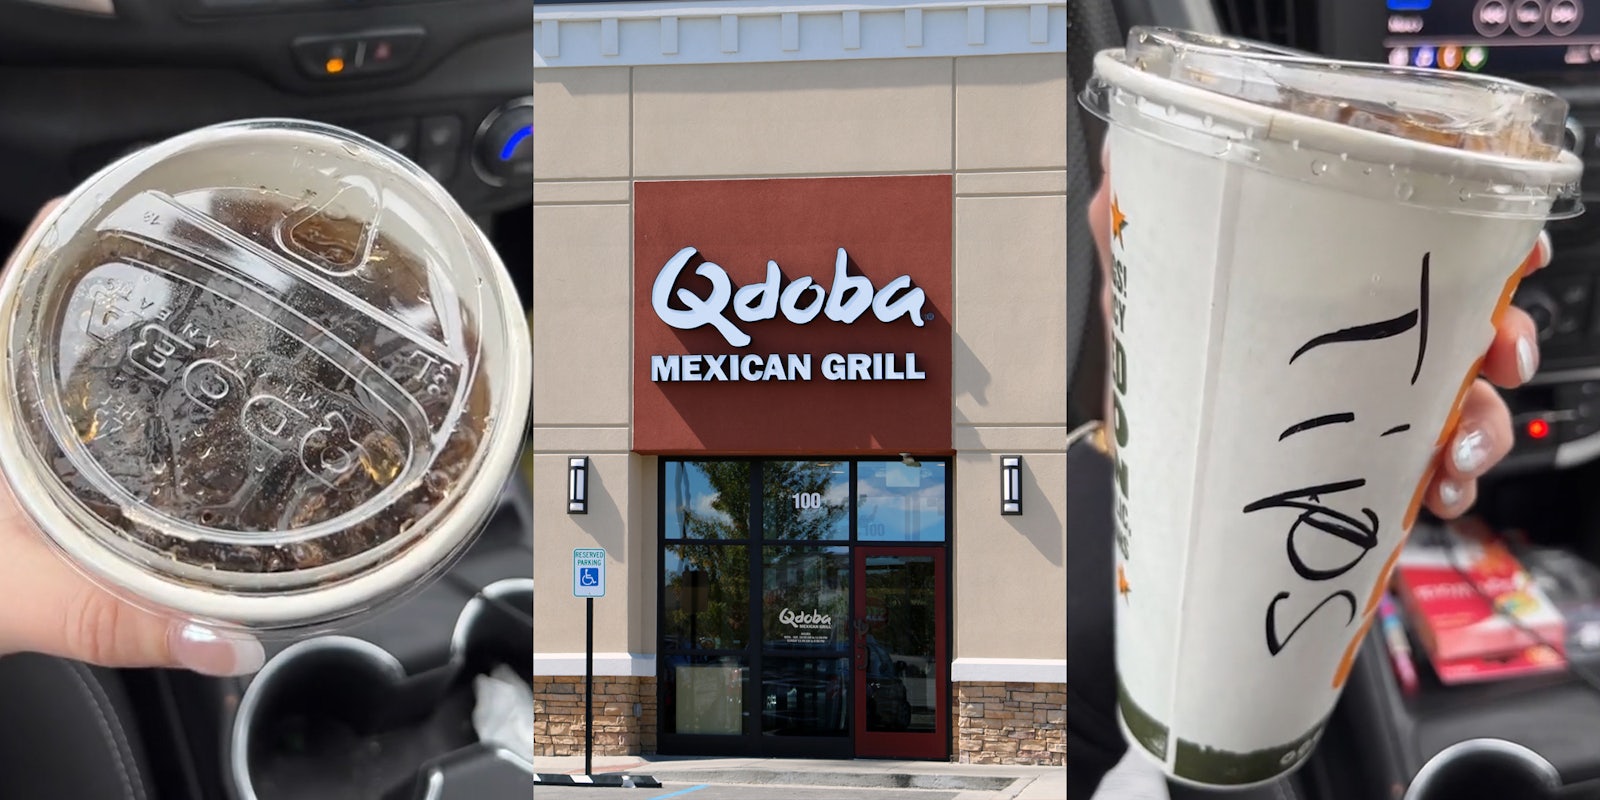 Qdoba cup filled with coke in car (l) Qdoba sign on building entrance (c) Qdoba tip cup filled with coke in car (r)